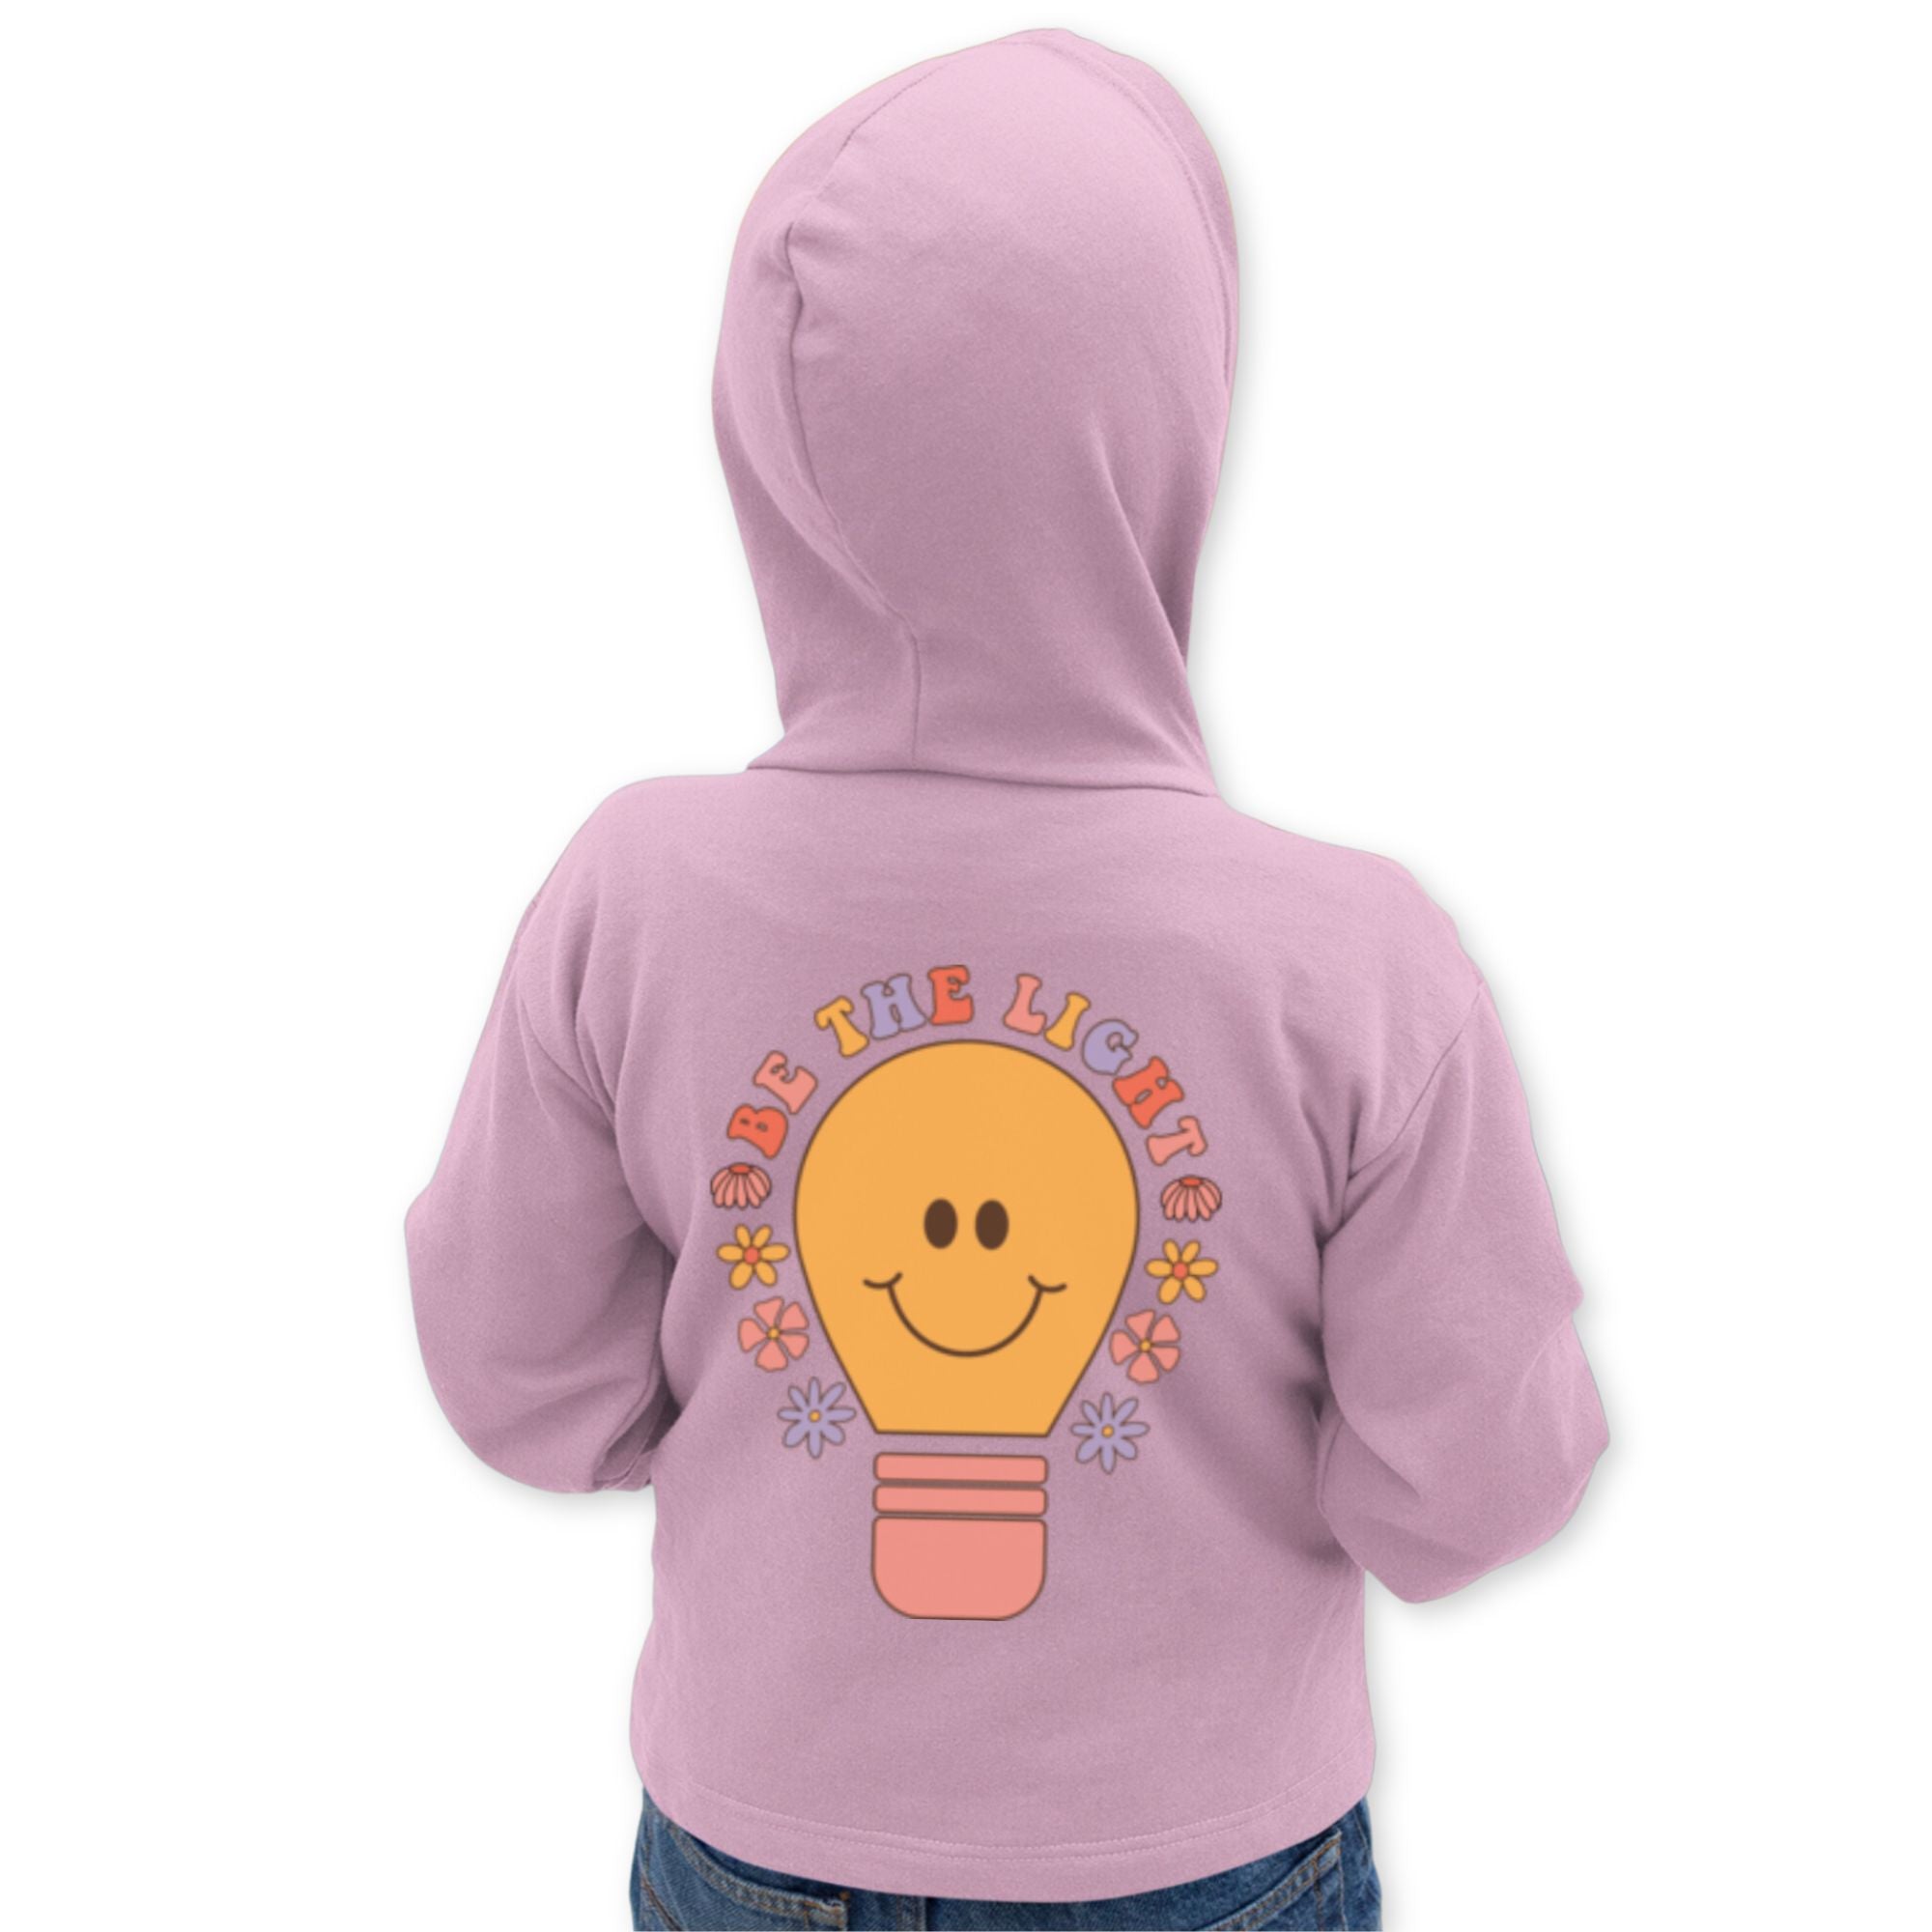 Be The Light Toddler Jacket Full-Zip Fleece - Design on Back Only Size: 2T Color: Heather Jesus Passion Apparel